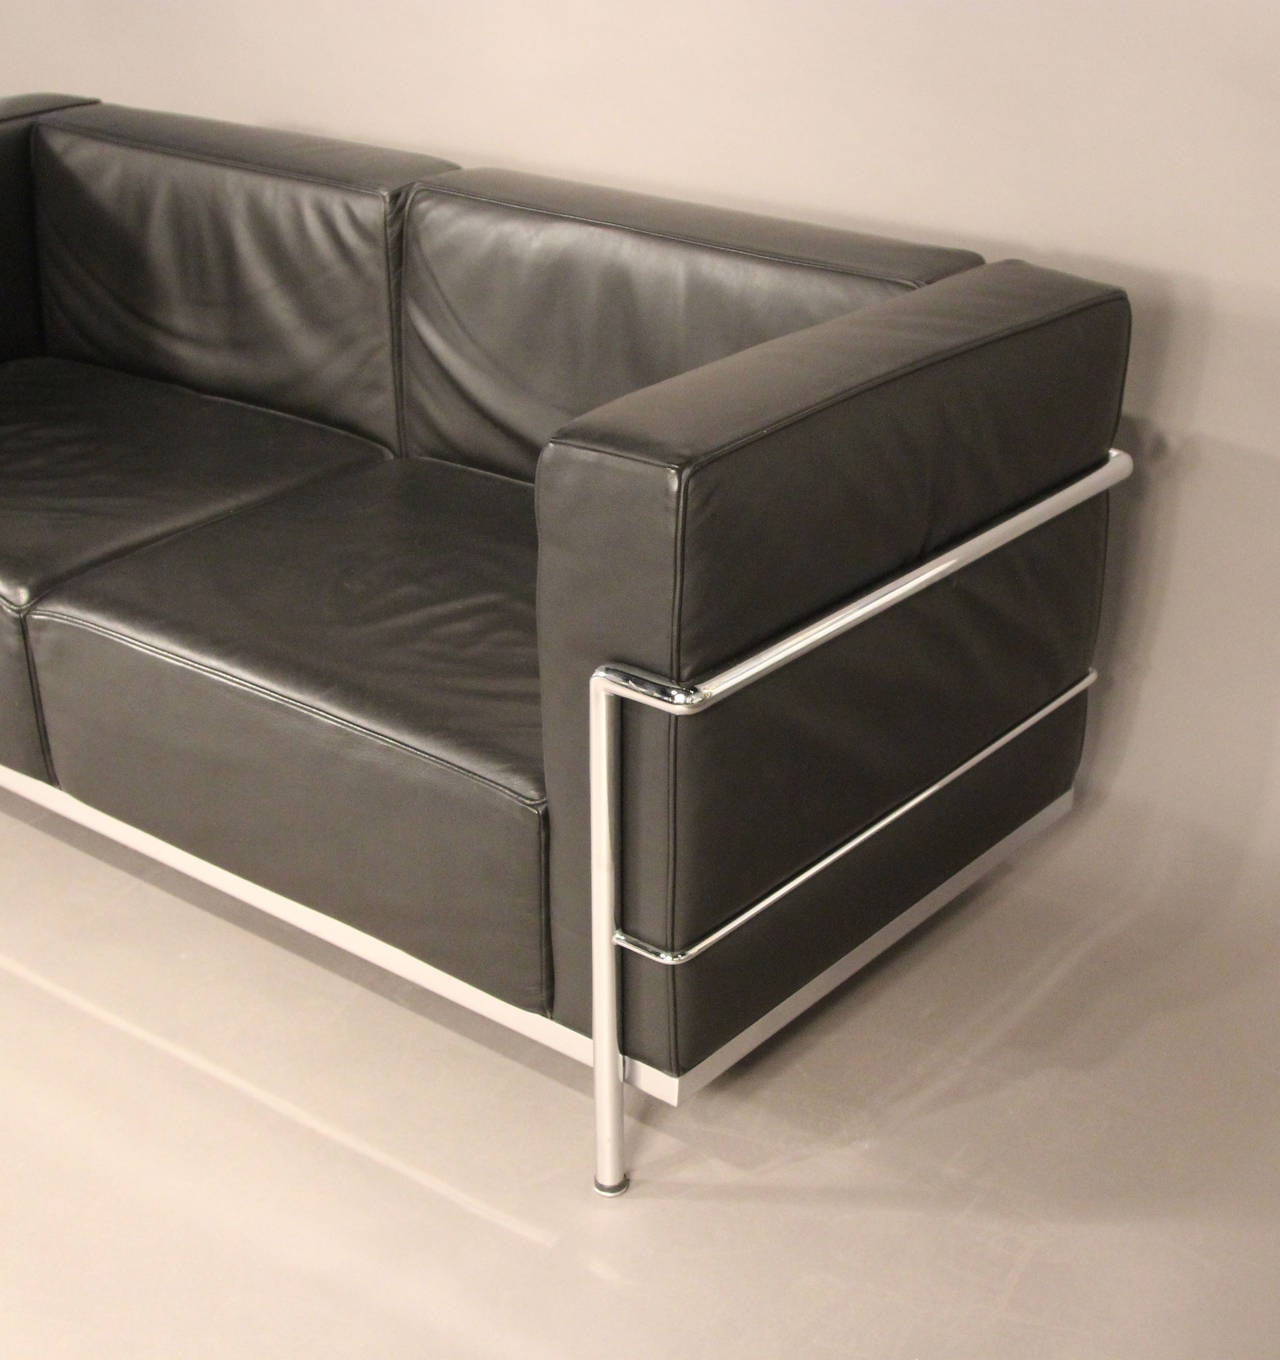 Iconic Le Corbusier LC3 loveseat in like new condition. Black leather with chrome tubing. This is a modern example from design within reach in almost perfect condition.